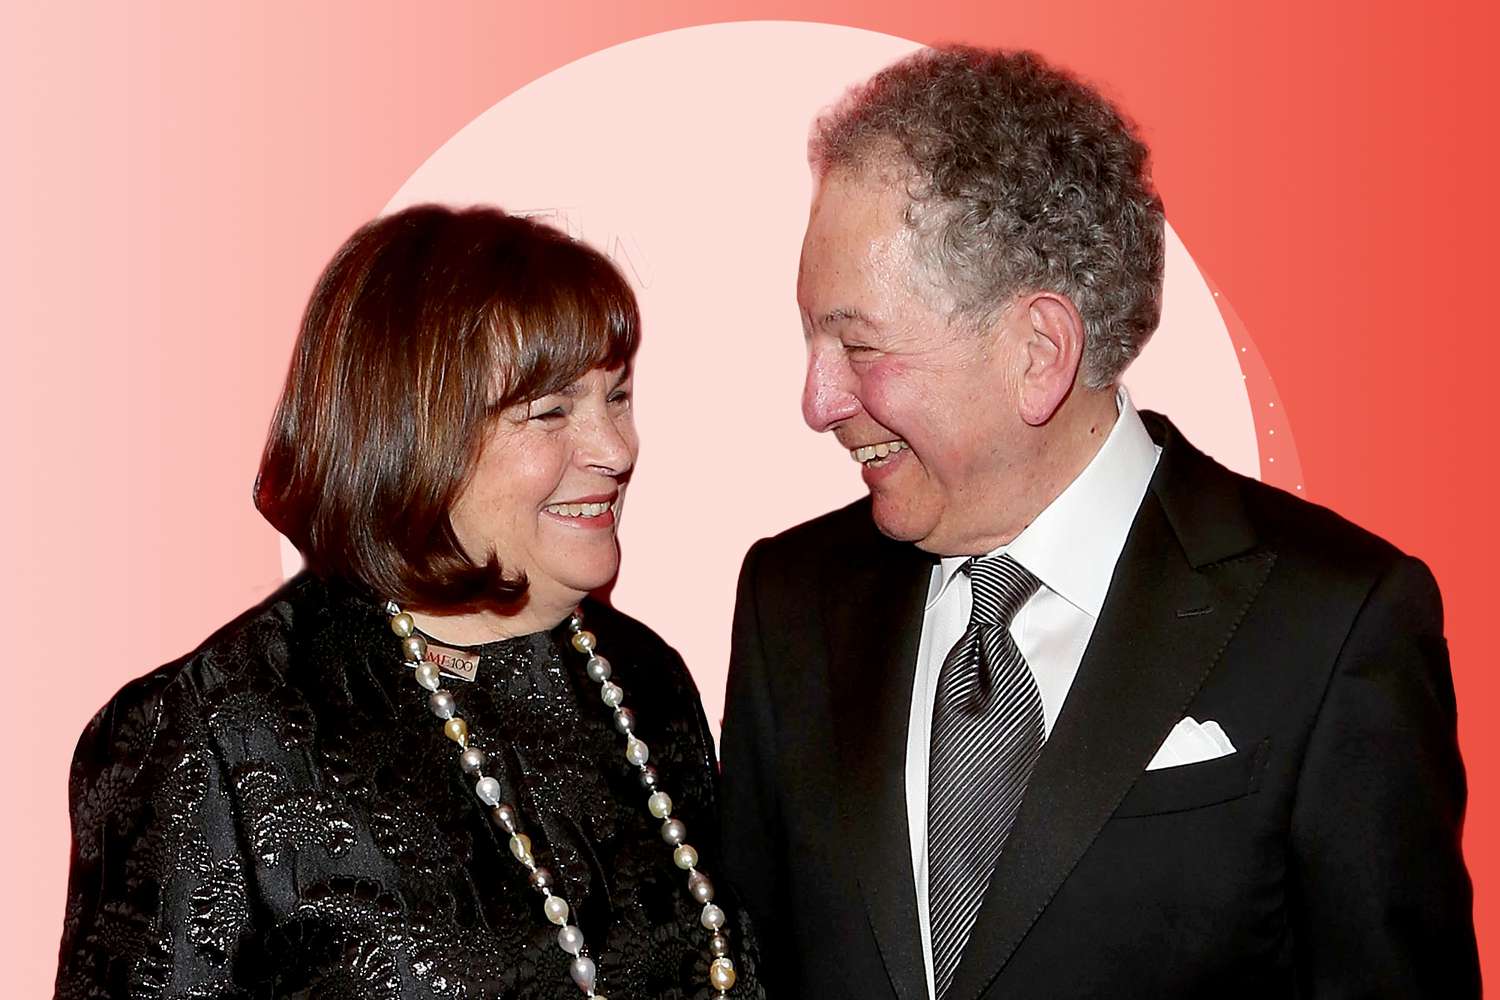 A photo of Ina Garten with her husband Jeffrey looking and smiling at each other